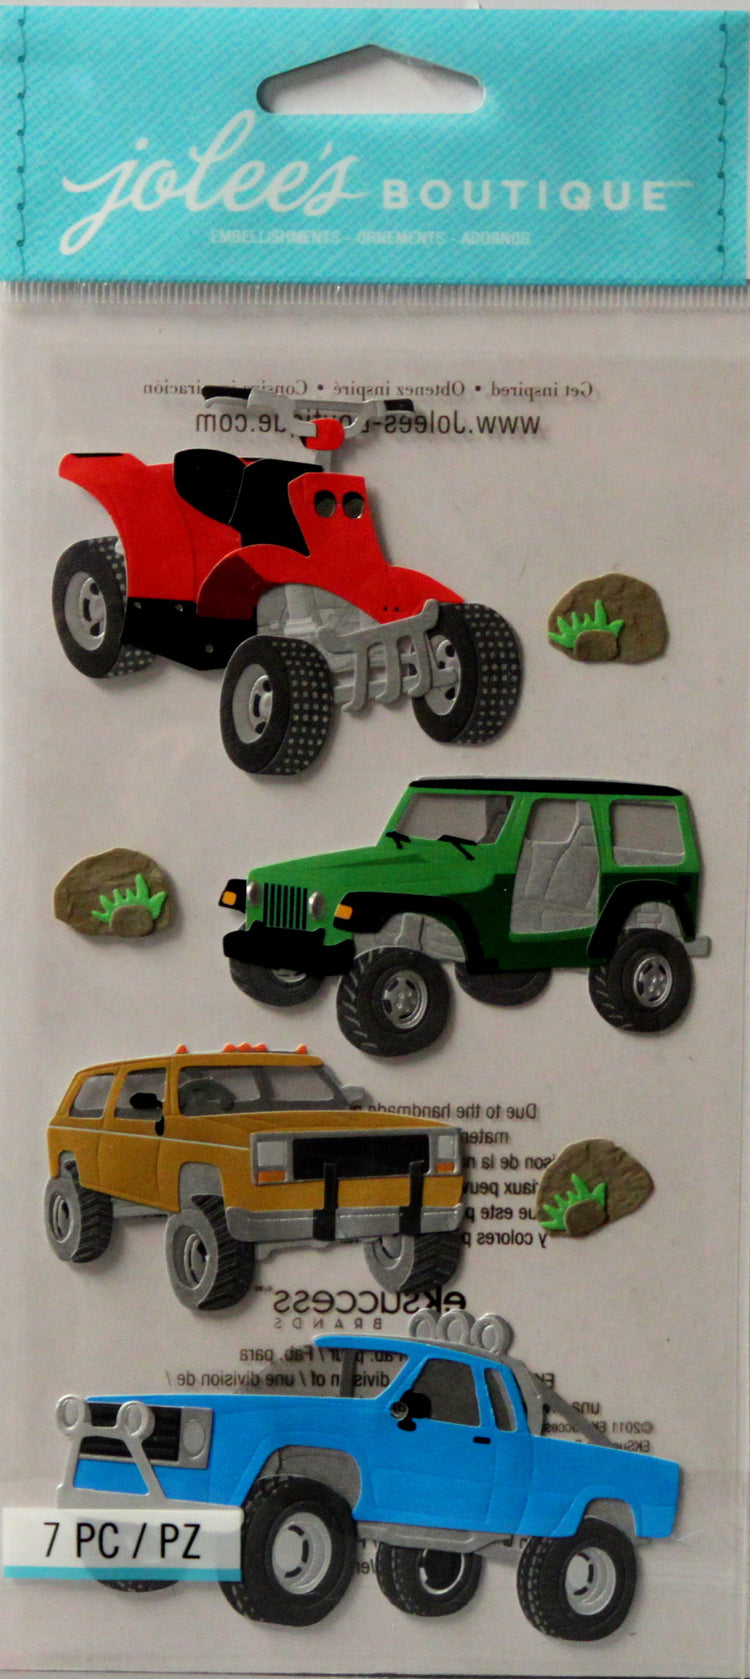 Jolee's Boutique Off Roading Dimensional Stickers